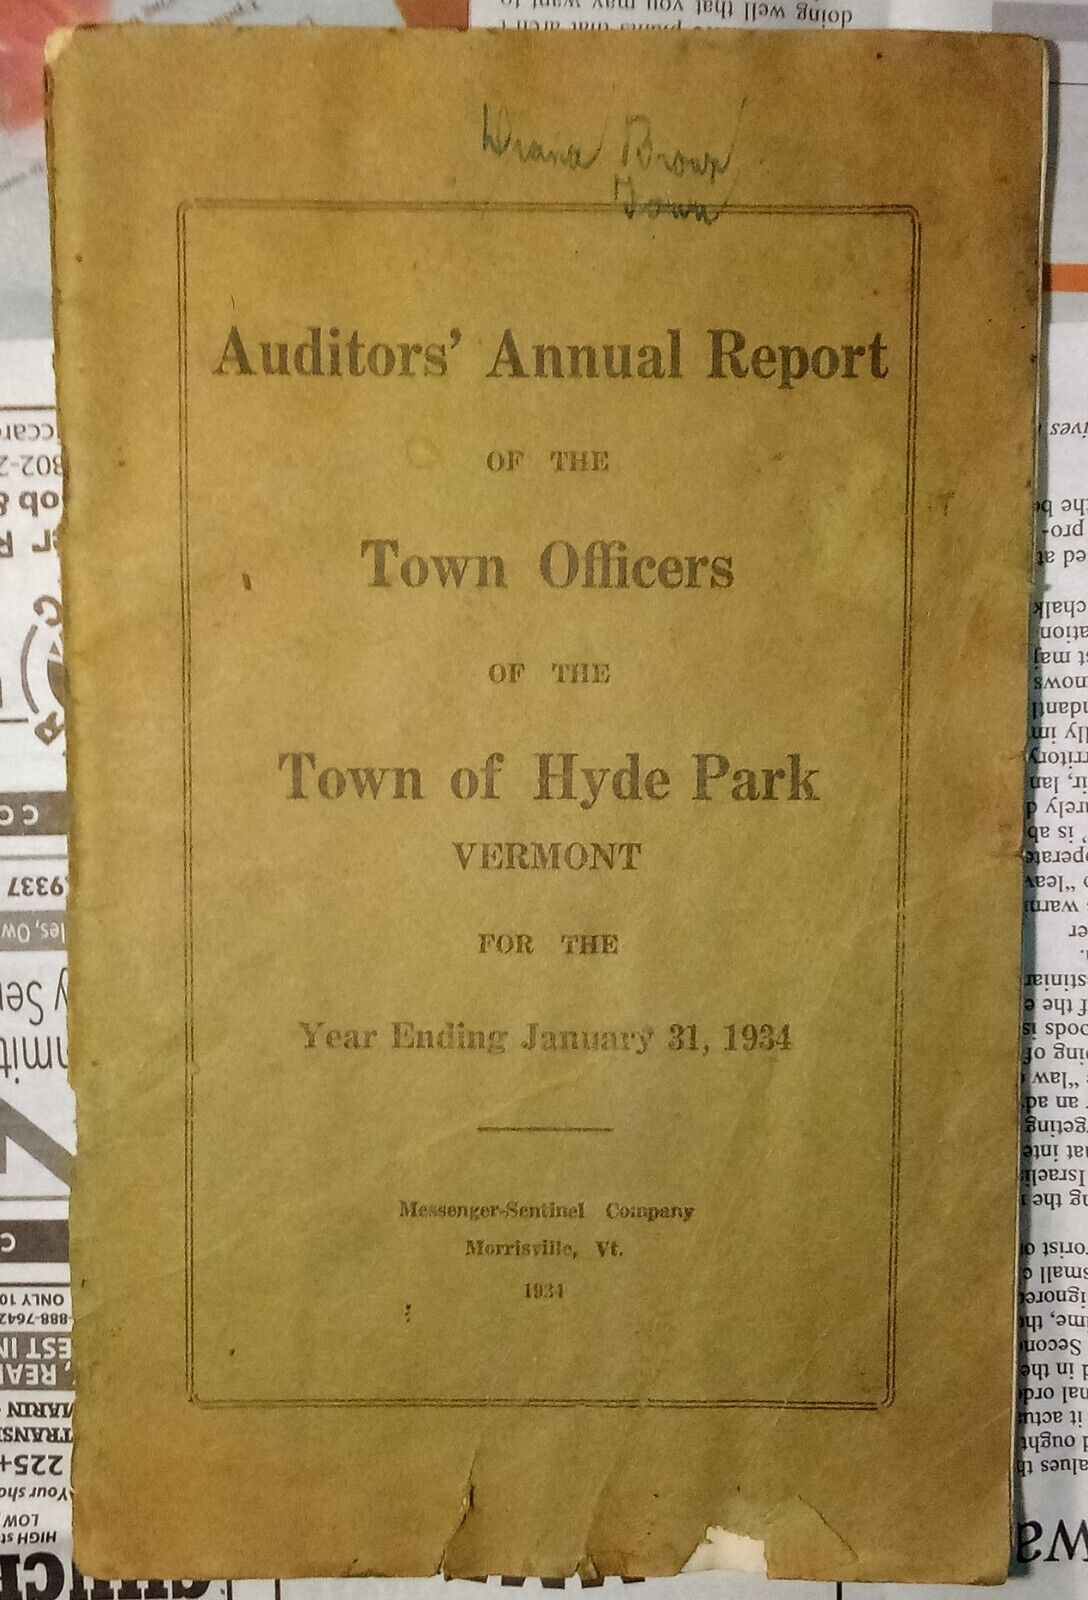 Auditors' Annual Report - Town Officers - Hyde Park Vermont - 1934